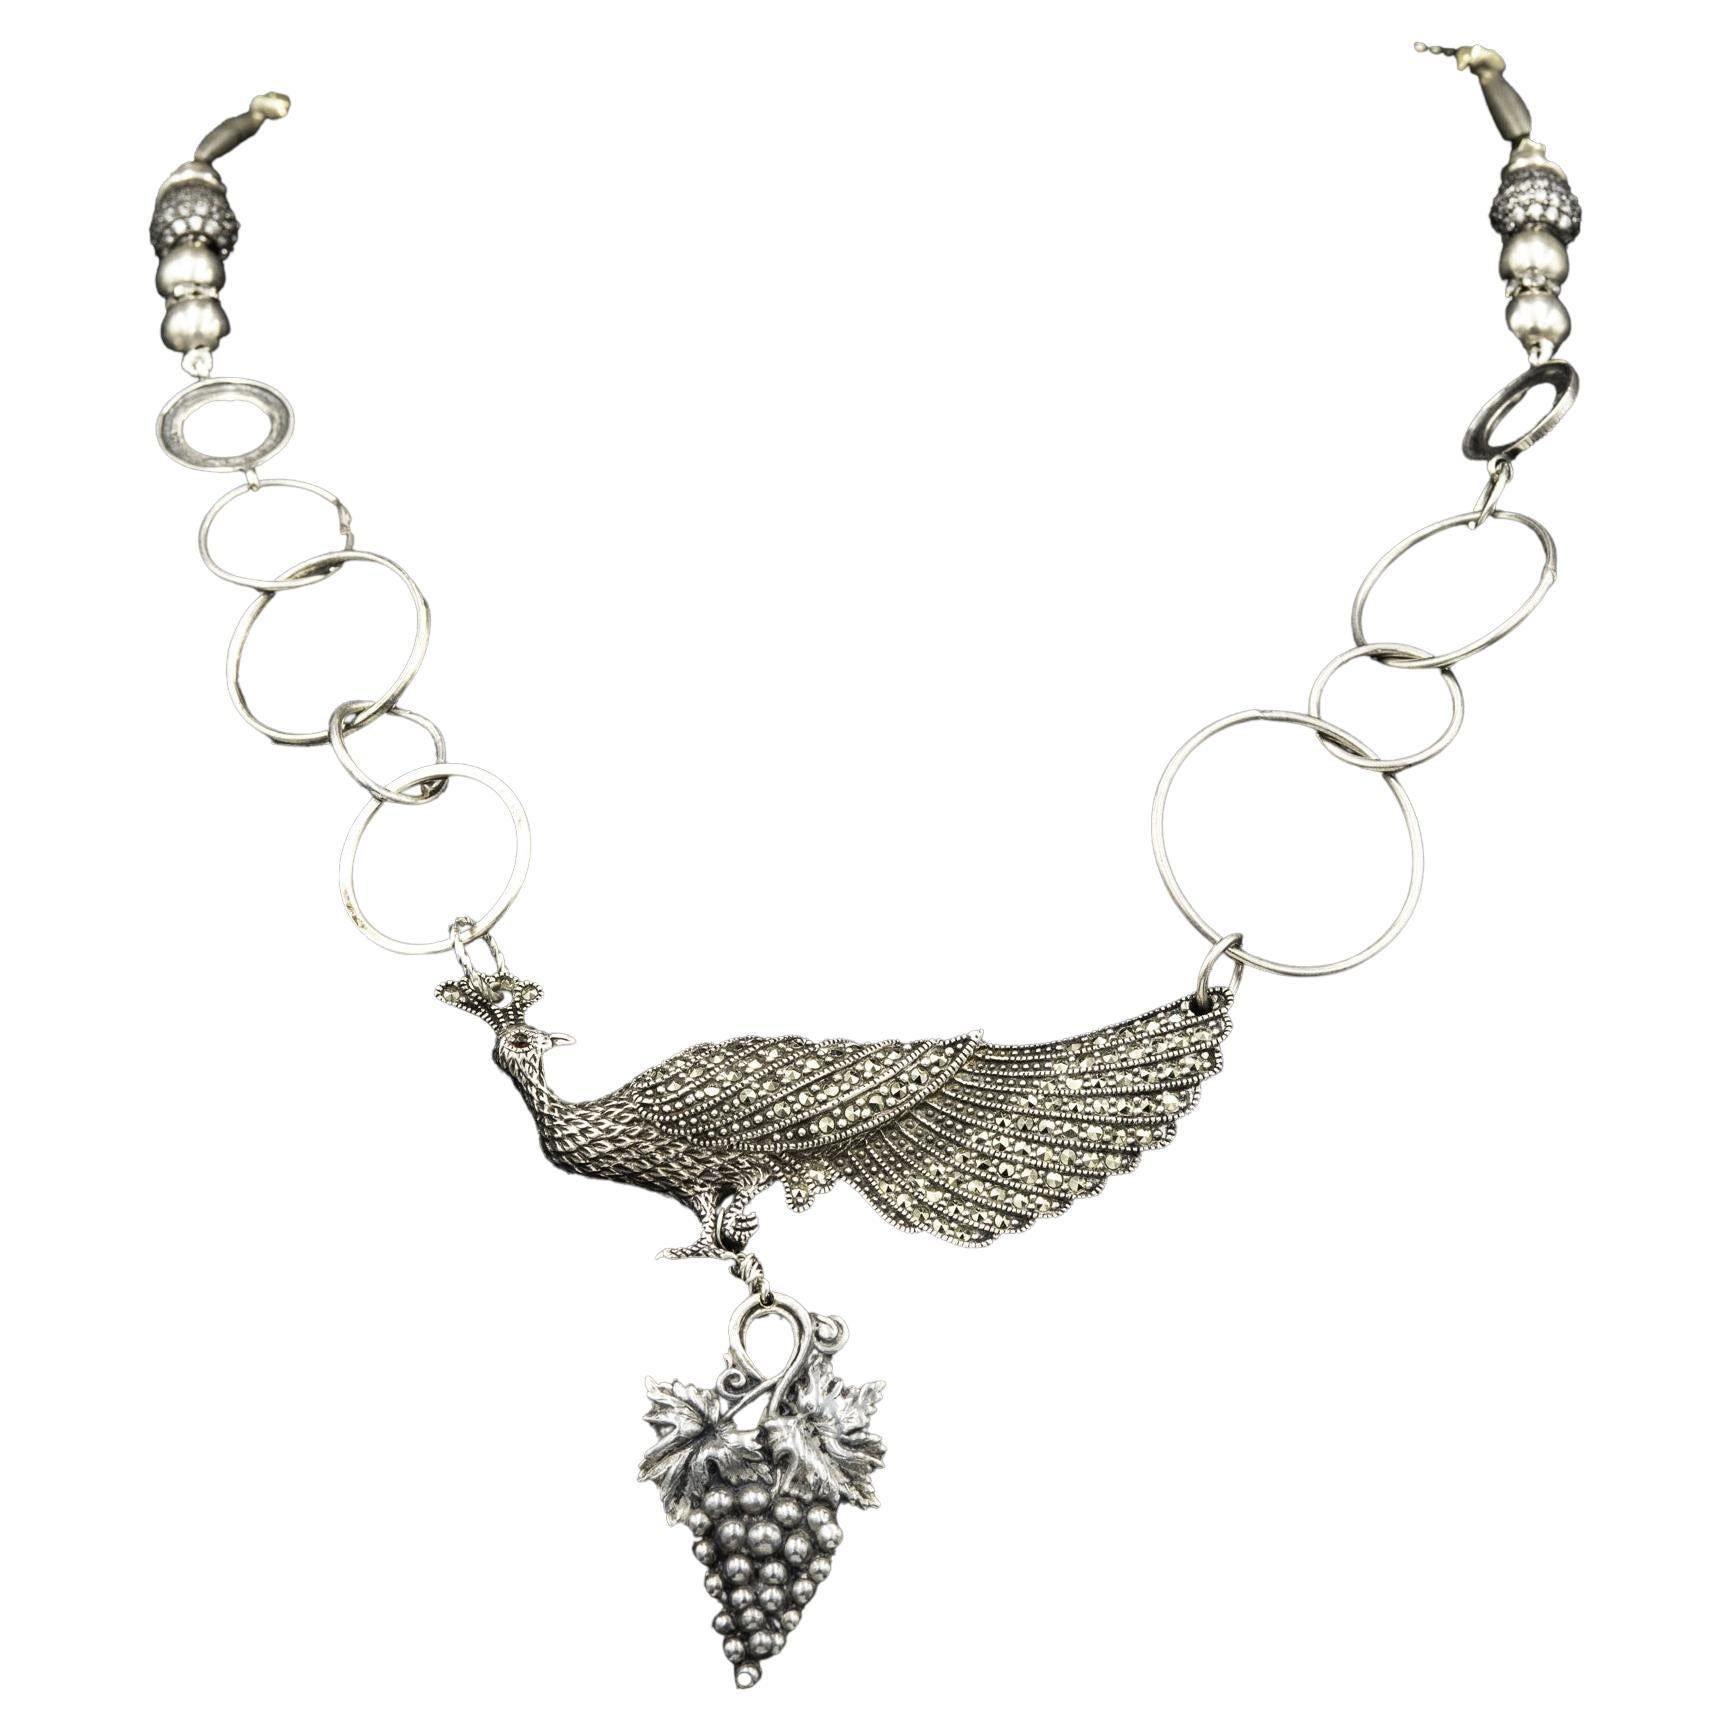 Sterling silver vintage peacock pendant necklace from Lorraine’s Bijoux on offer For Sale